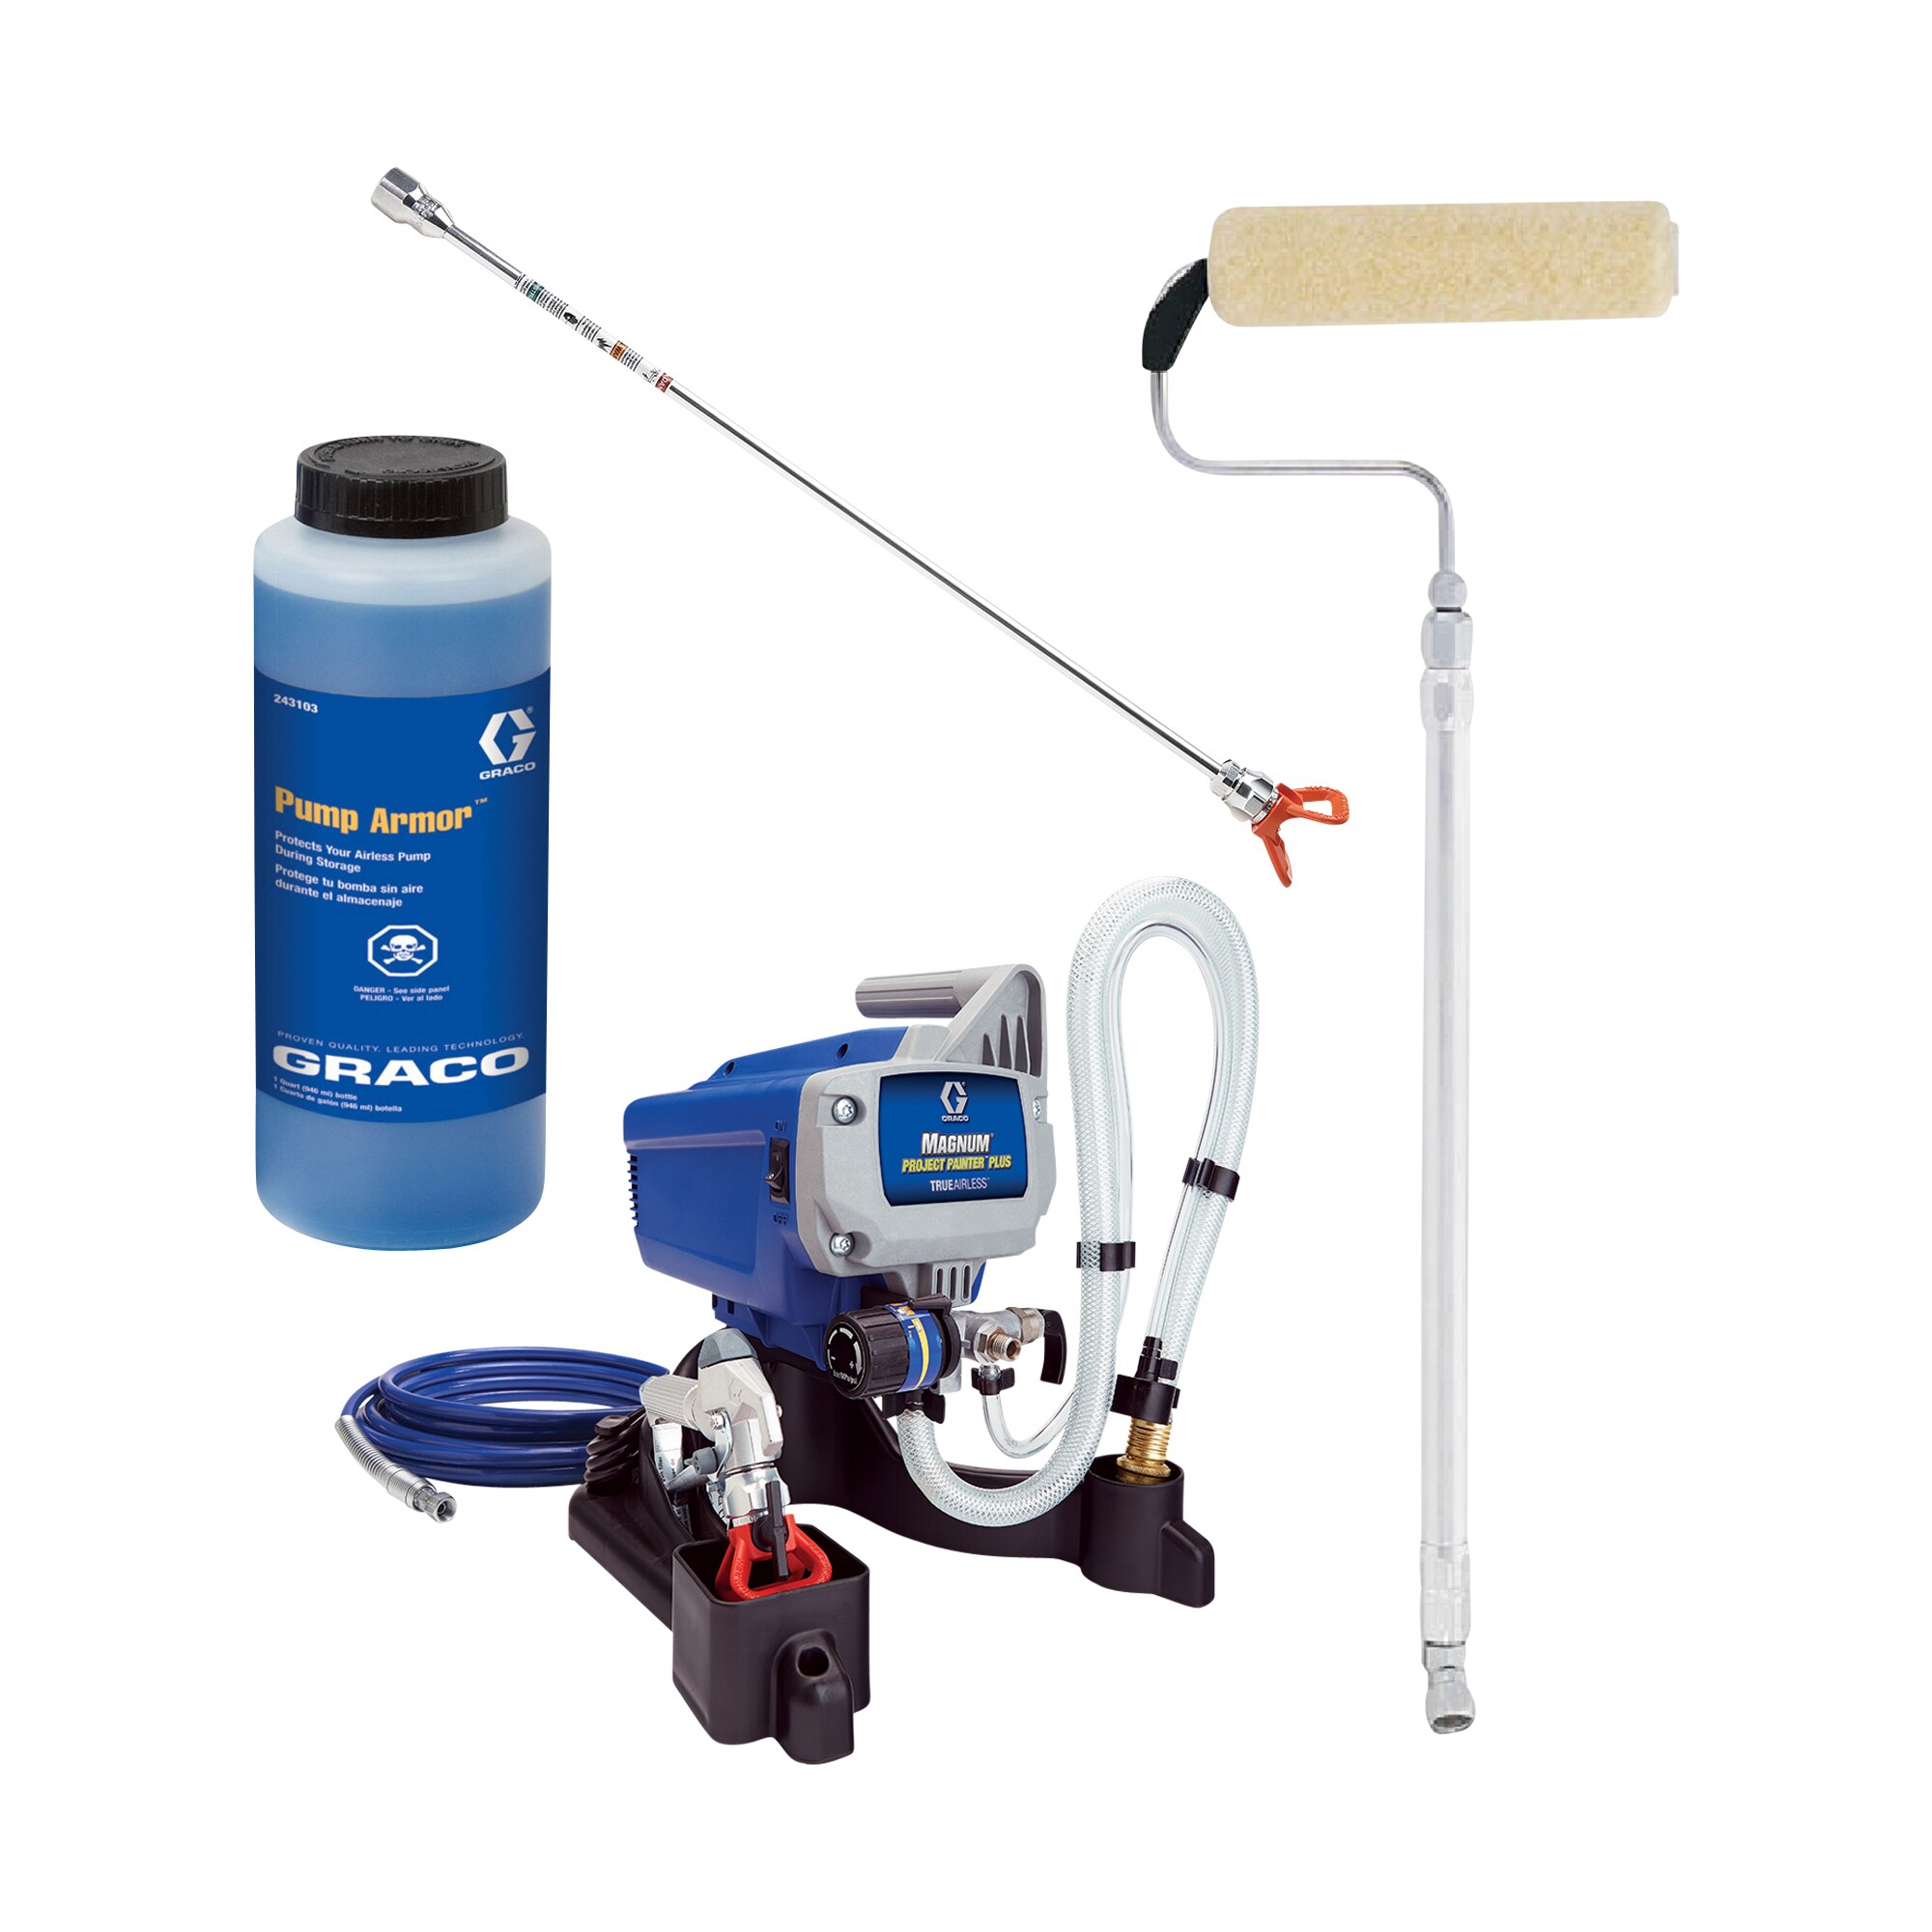 Graco Project Painter Plus Airless Paint Sprayer and Accessories Kit